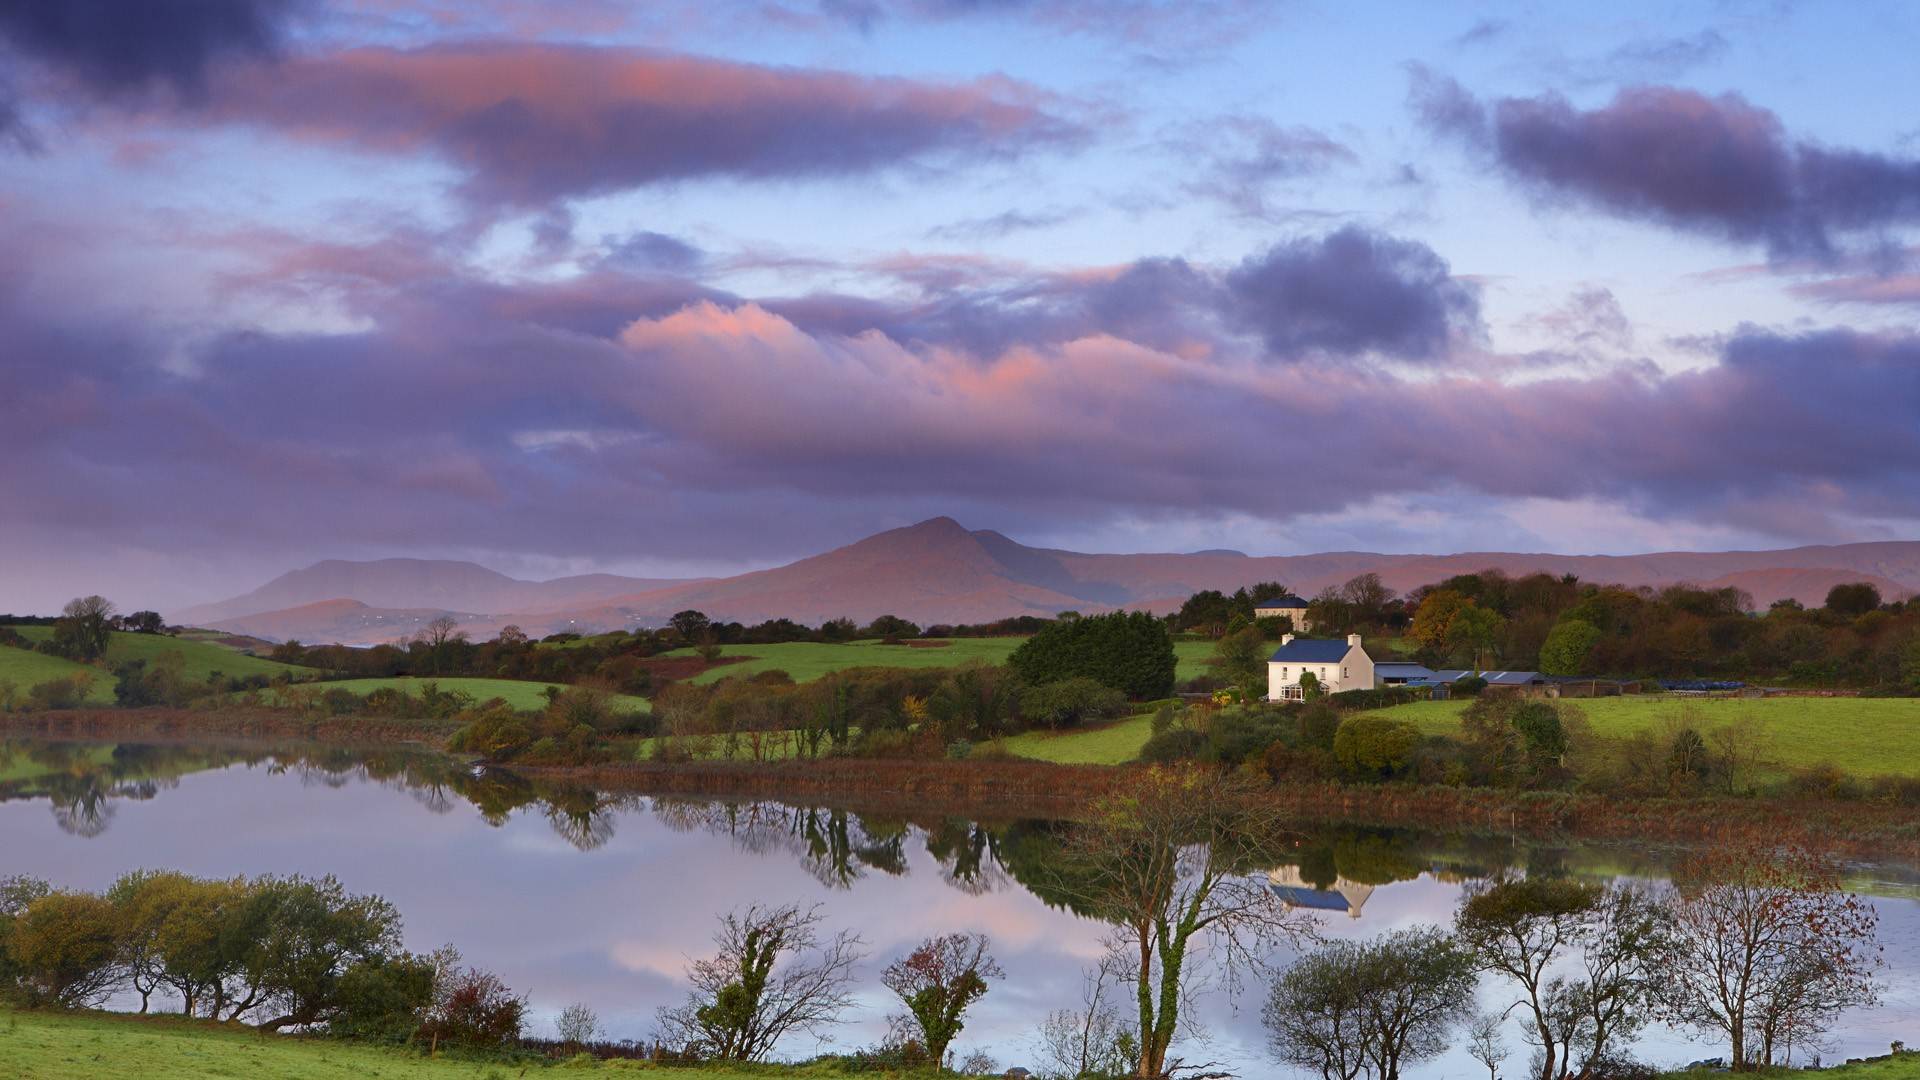 Ireland Landscape at Dawn This is a beautiful landscape view of